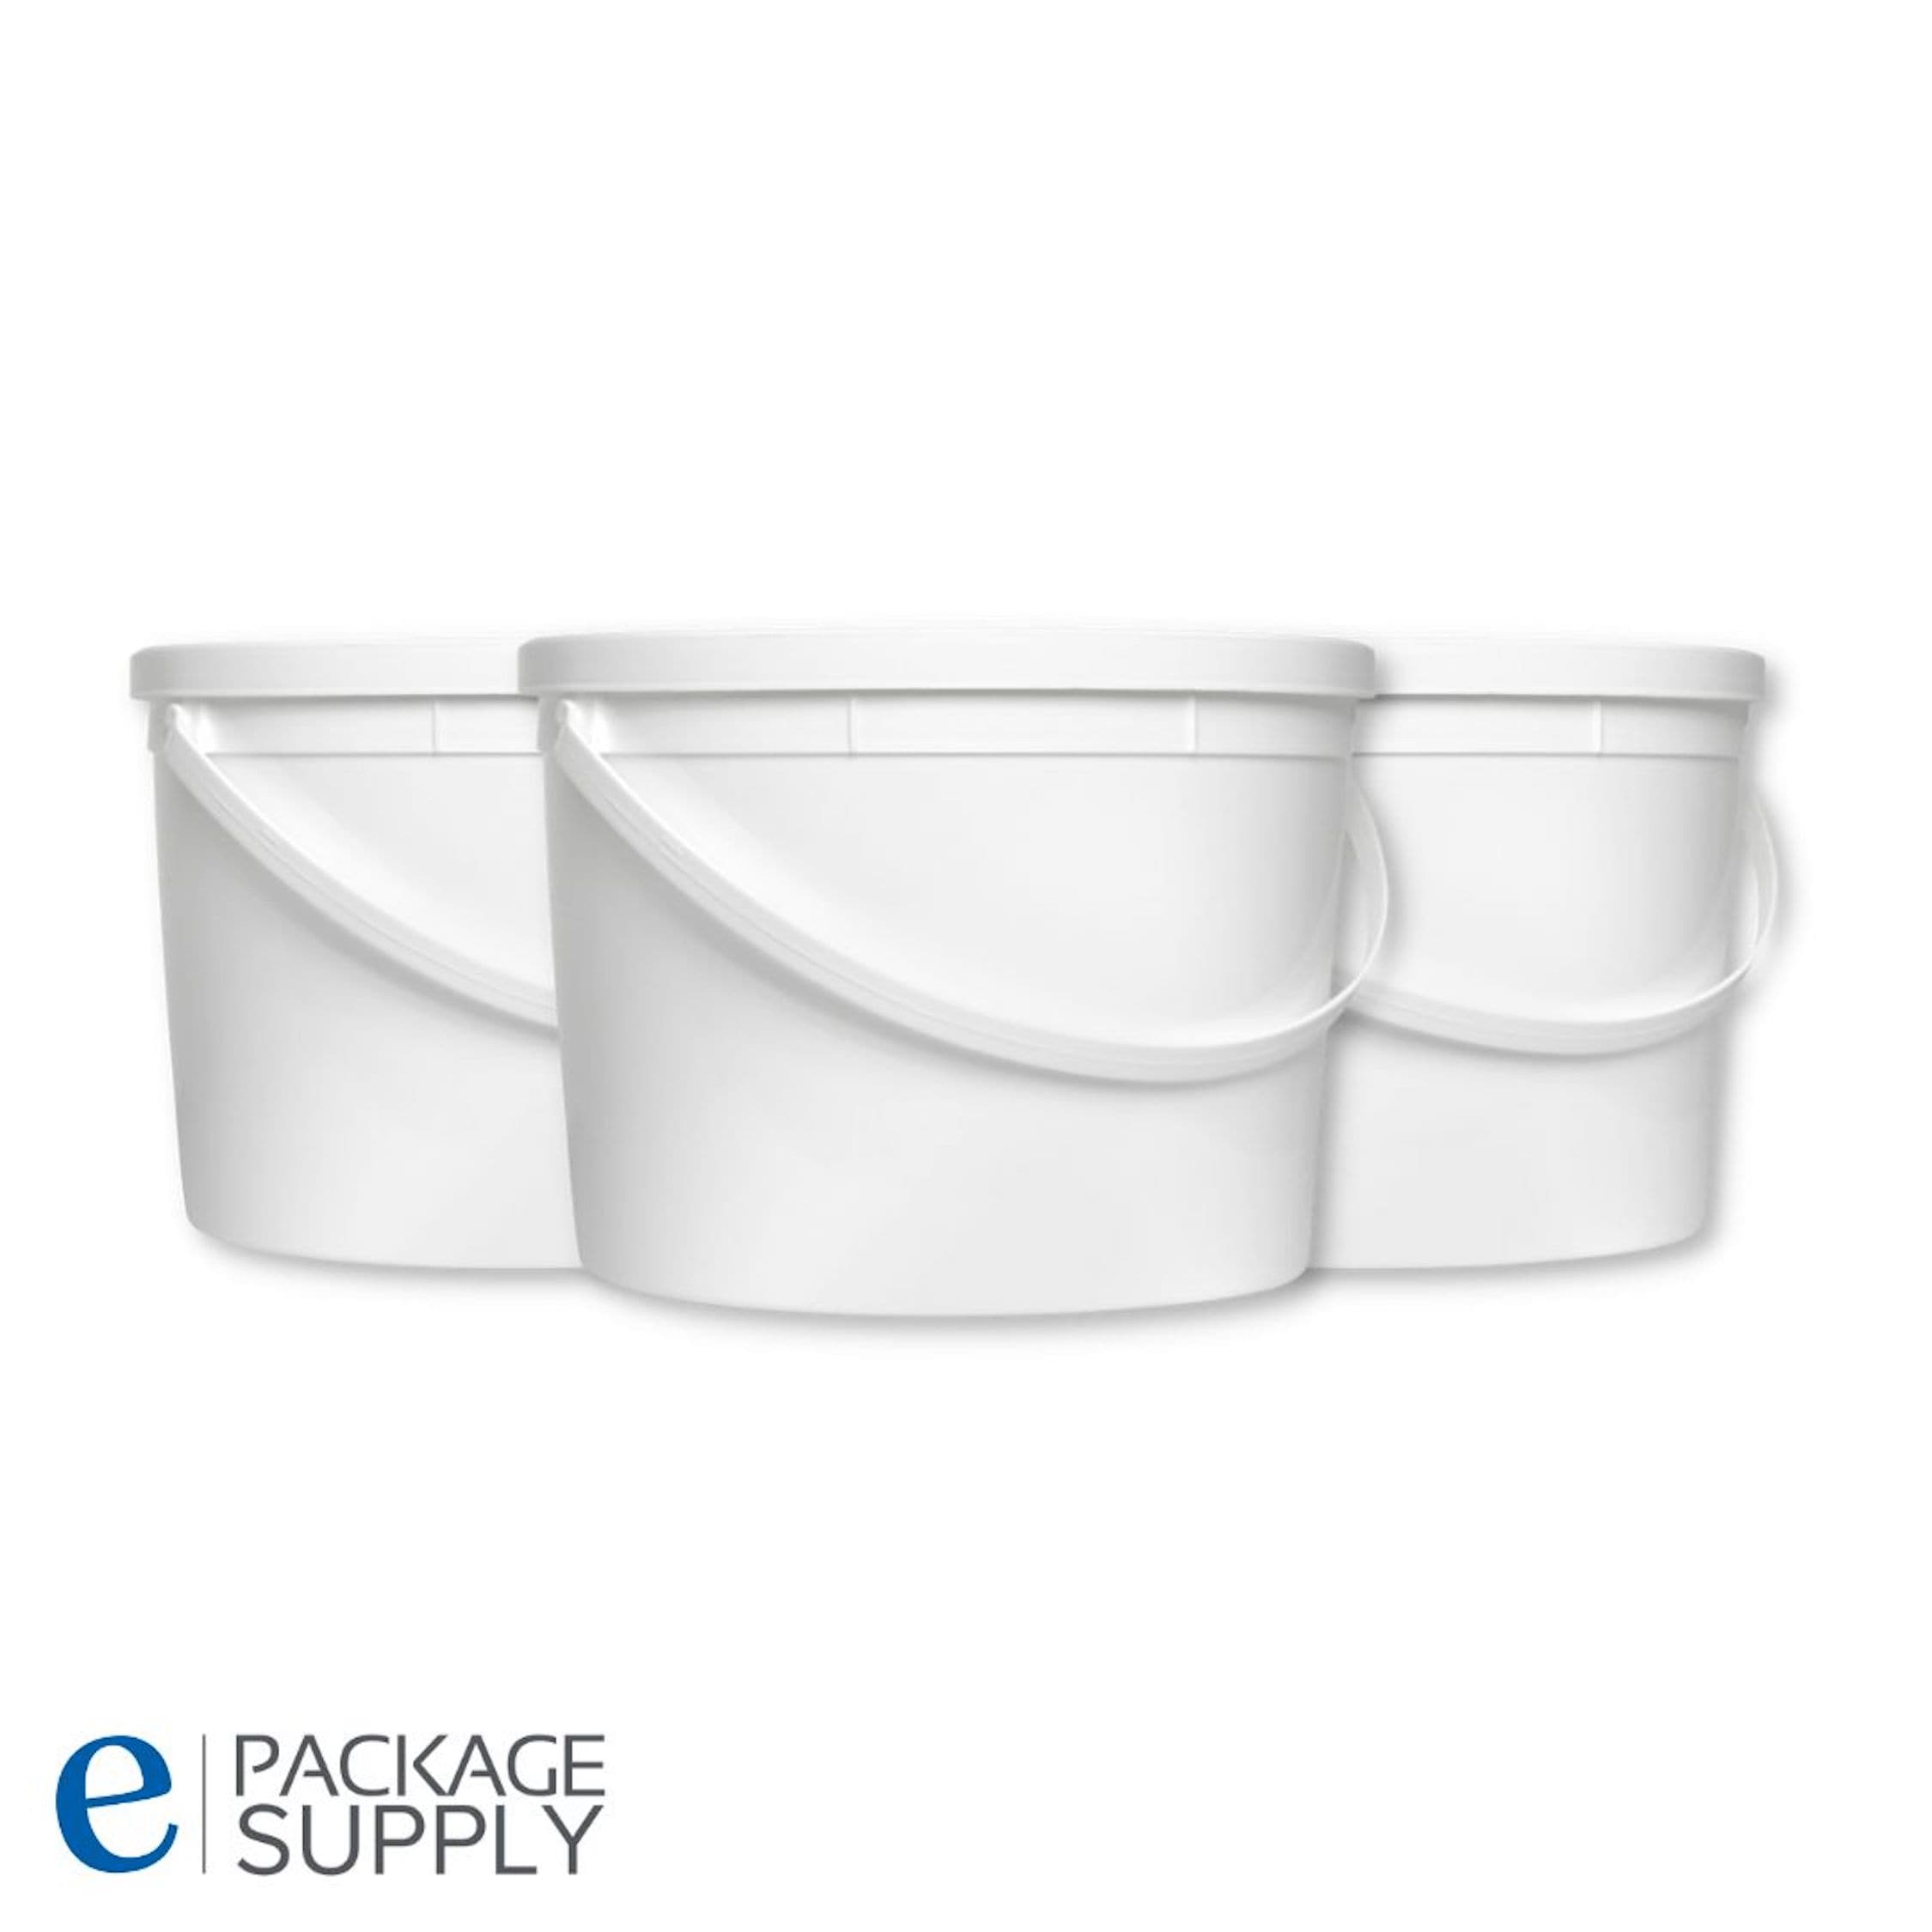 3 Gallon White Plastic Ice Cream Tubs (Without Lids) - 10 Count